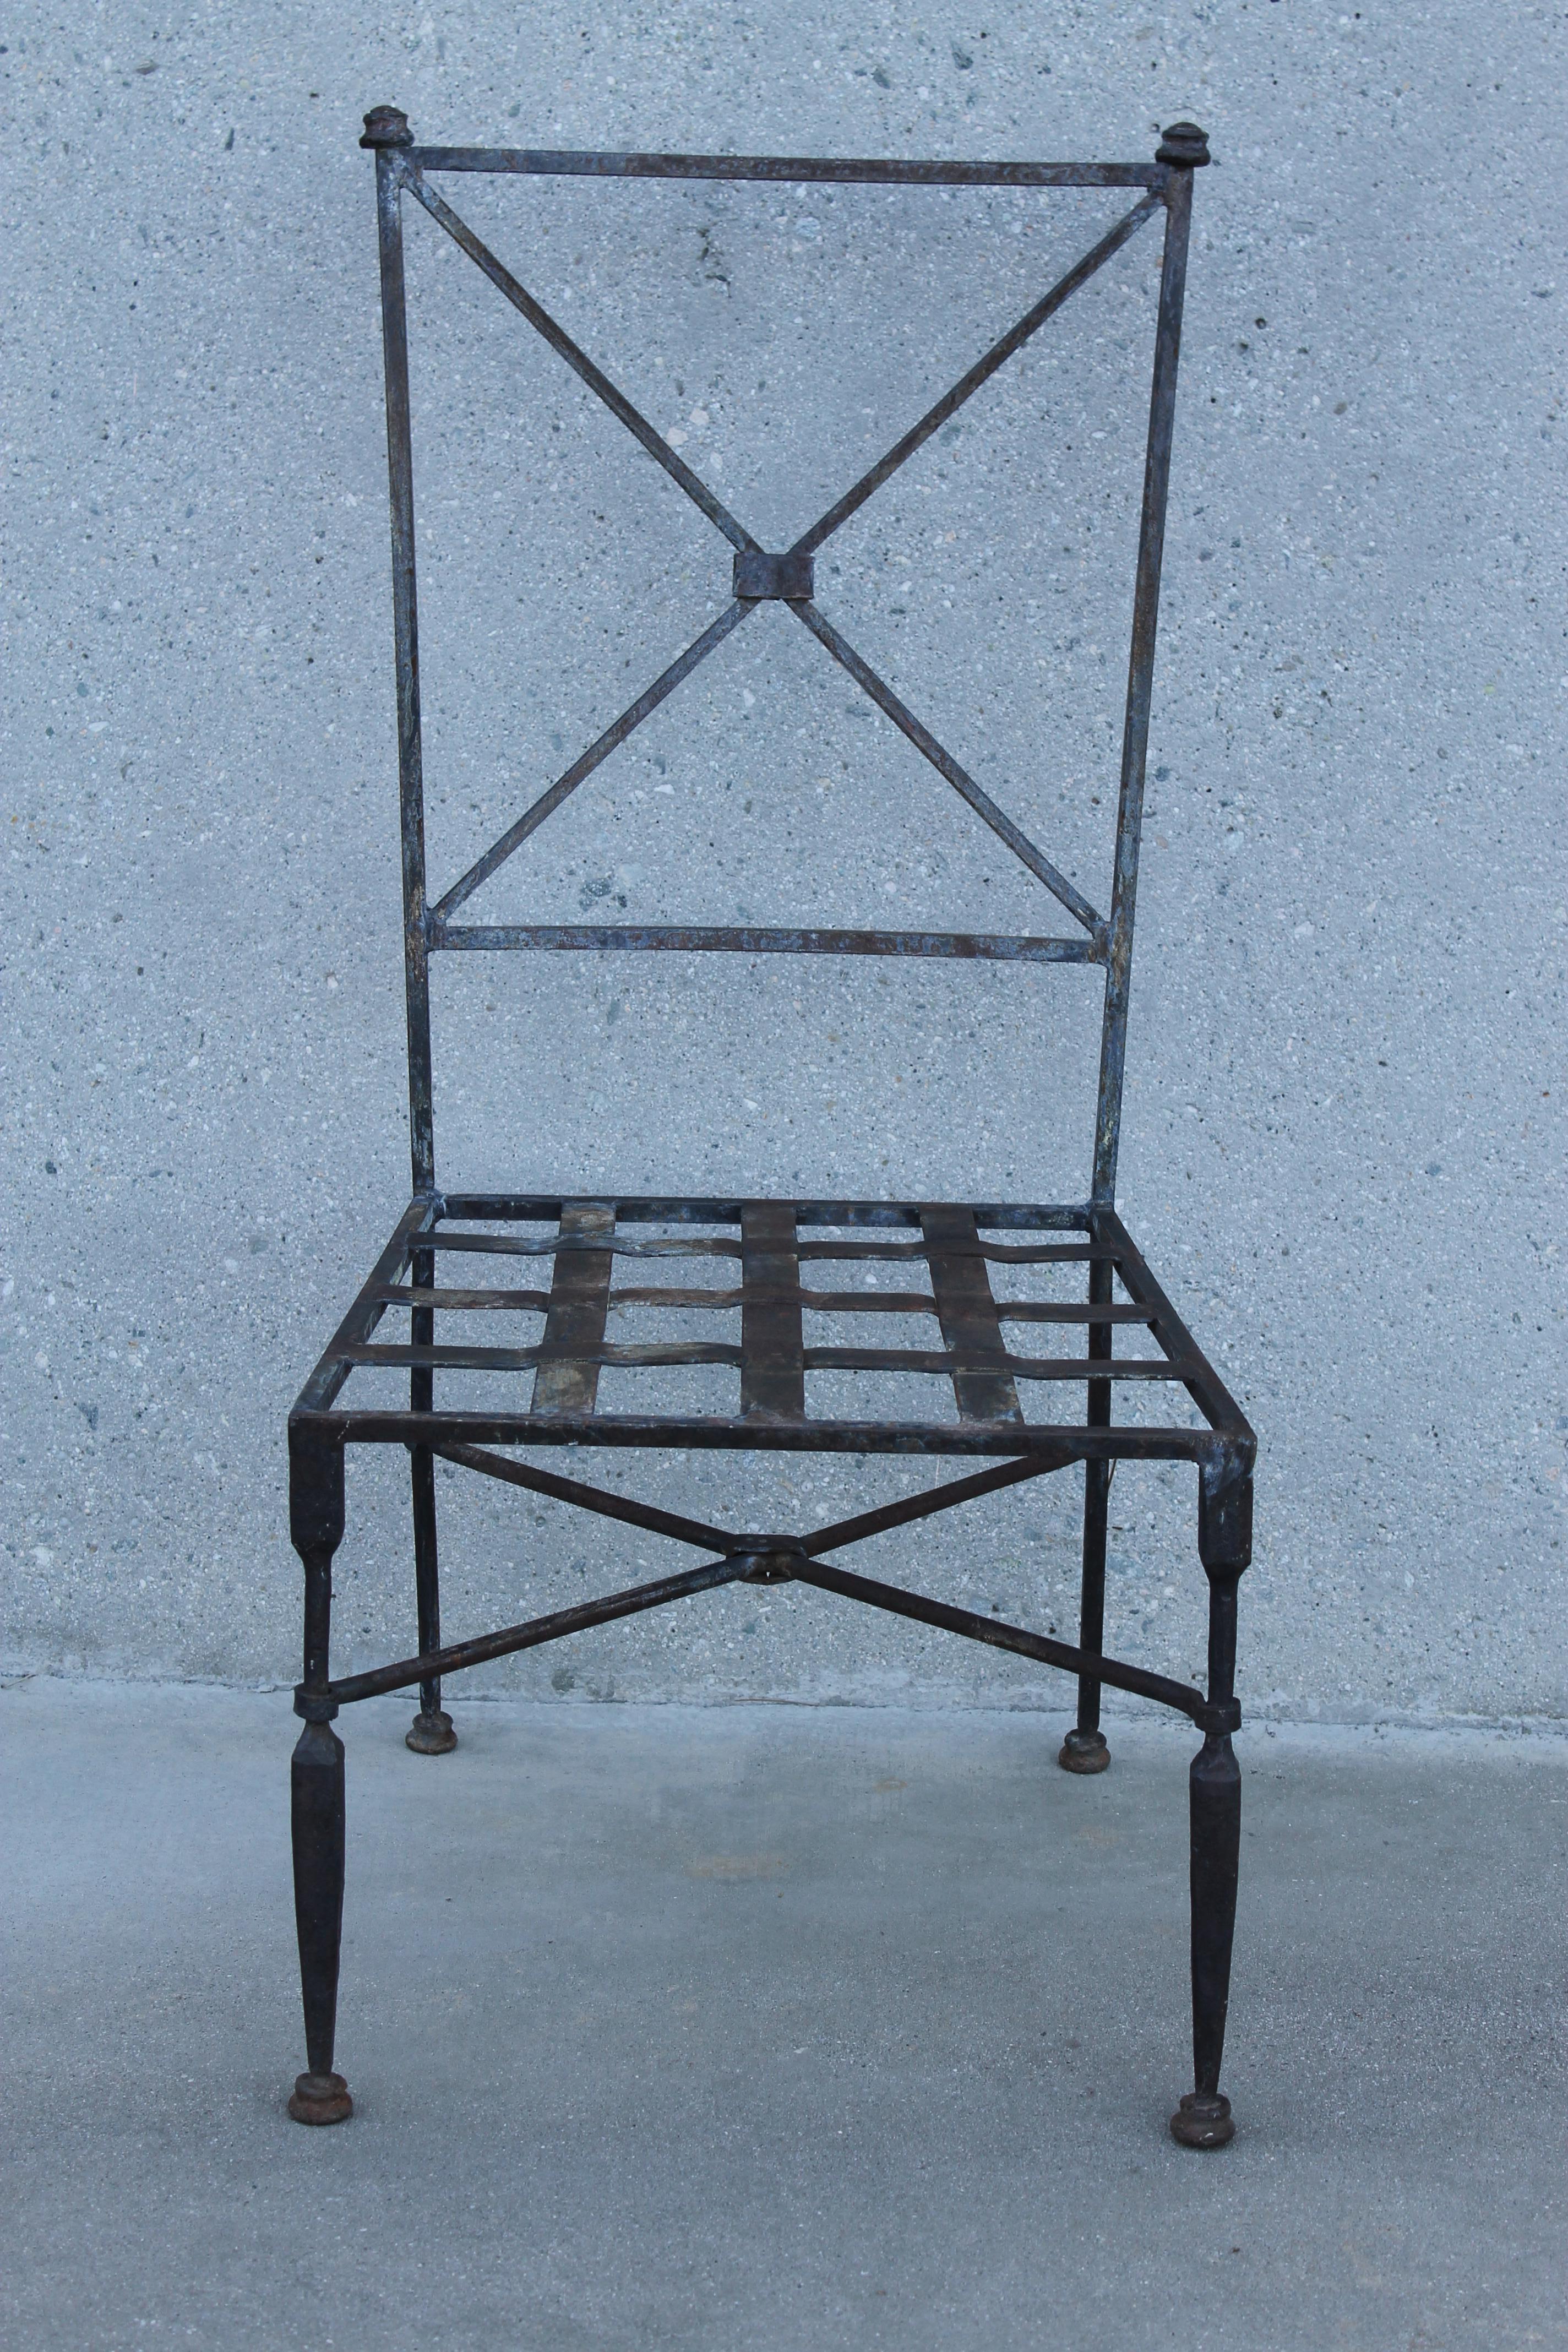 Steel Set of Forged Iron Neoclassical Chairs